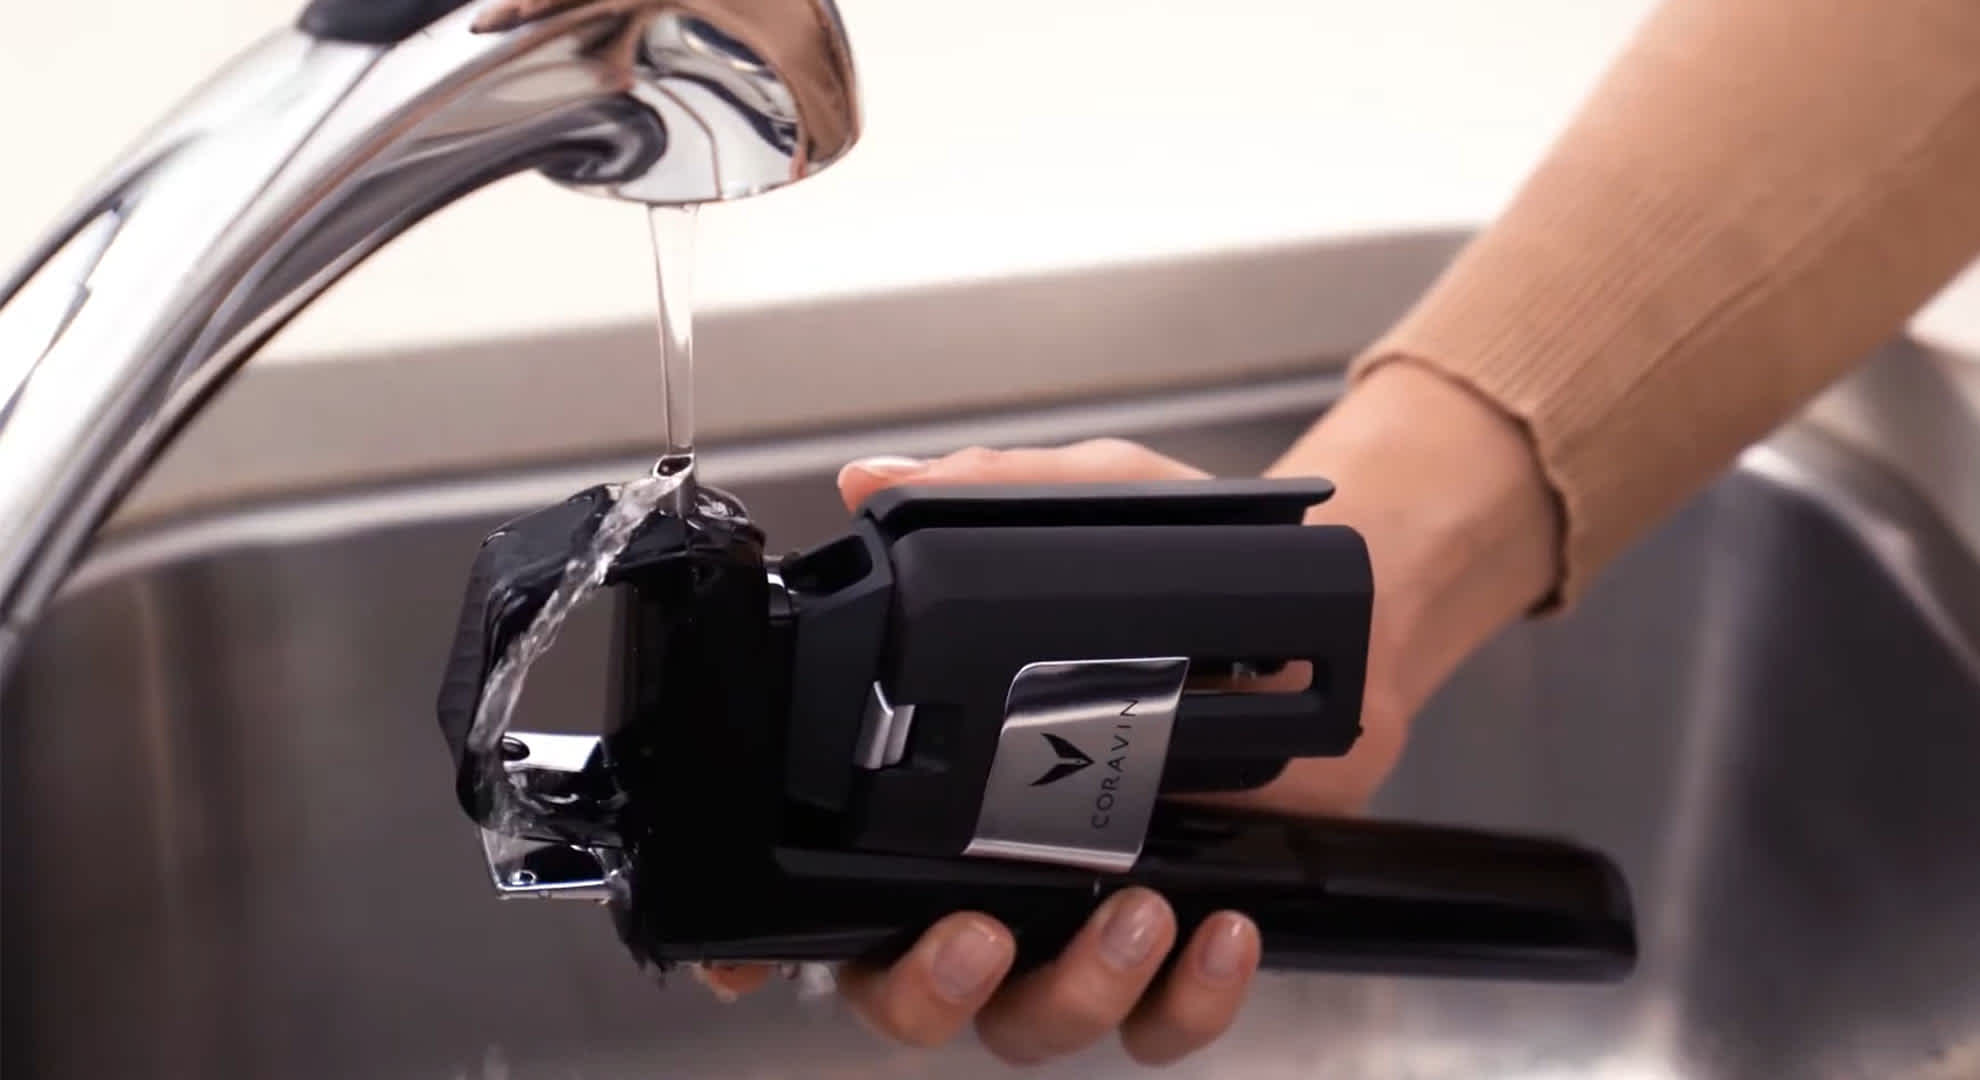 Coravin Model Six Wine Preservation System under a running faucet